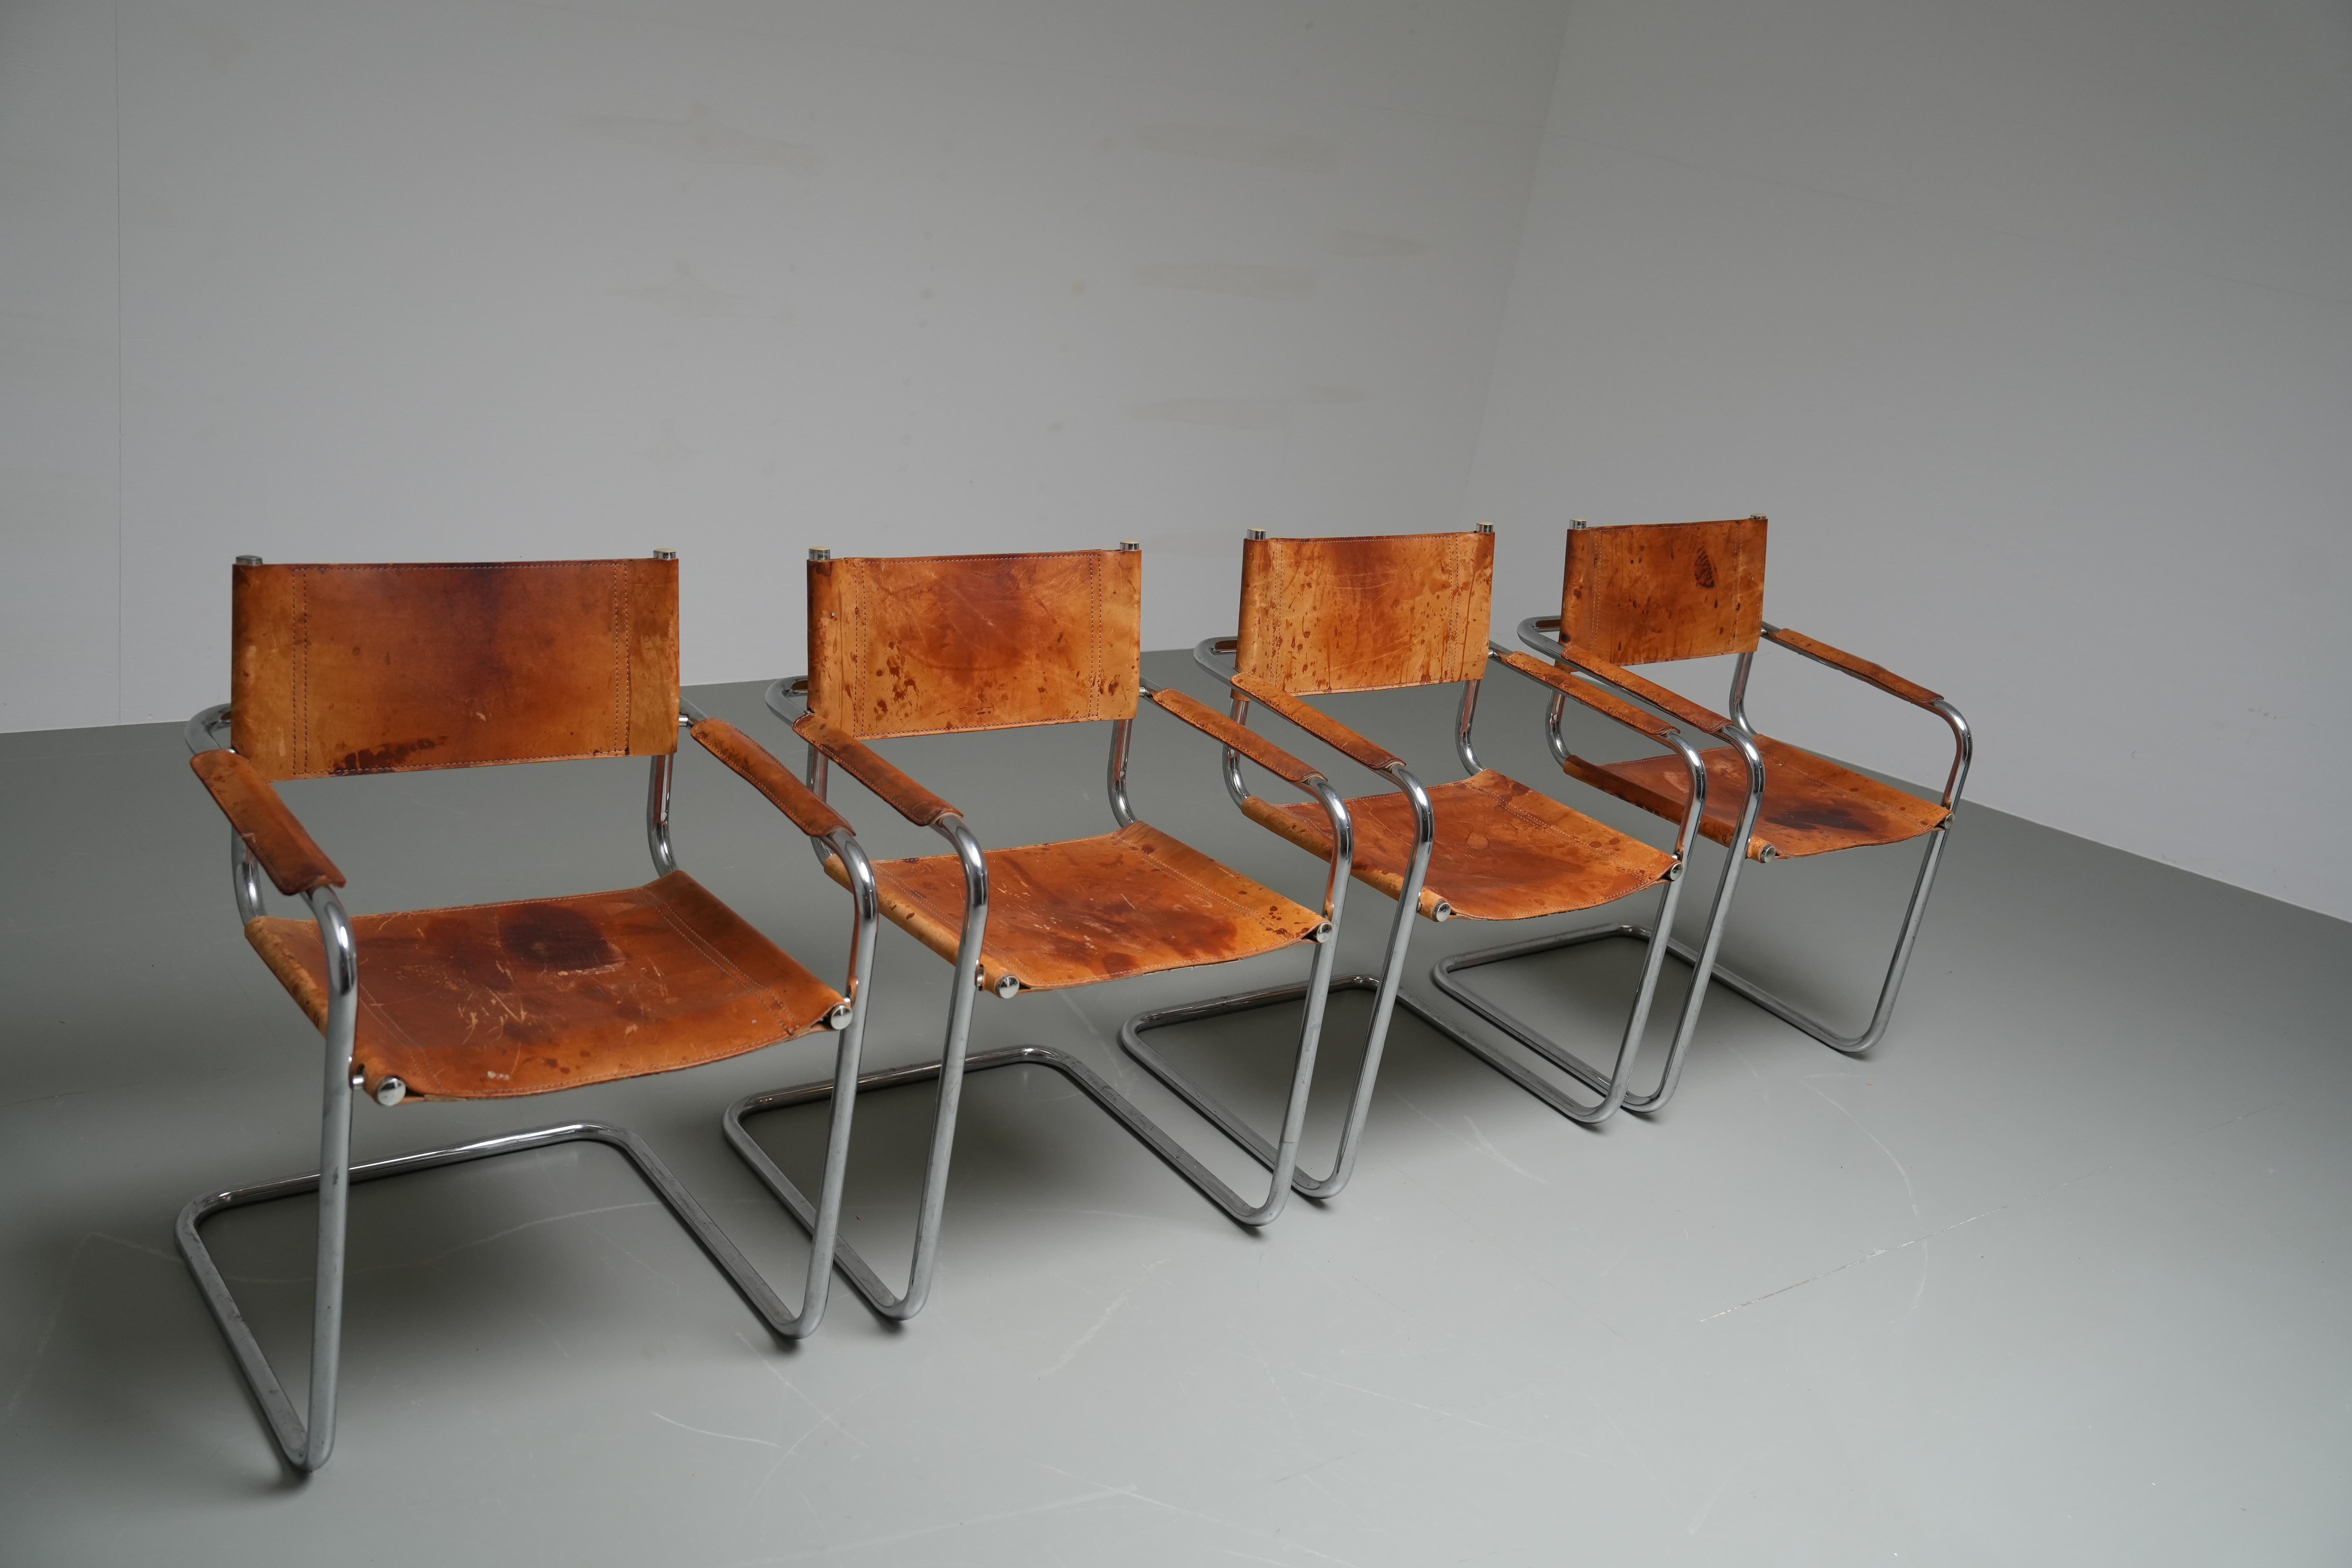 Leather Set of 4 Dinging Chairs B 34 by Mart Stam in patinated leather, Italy, 1970's For Sale